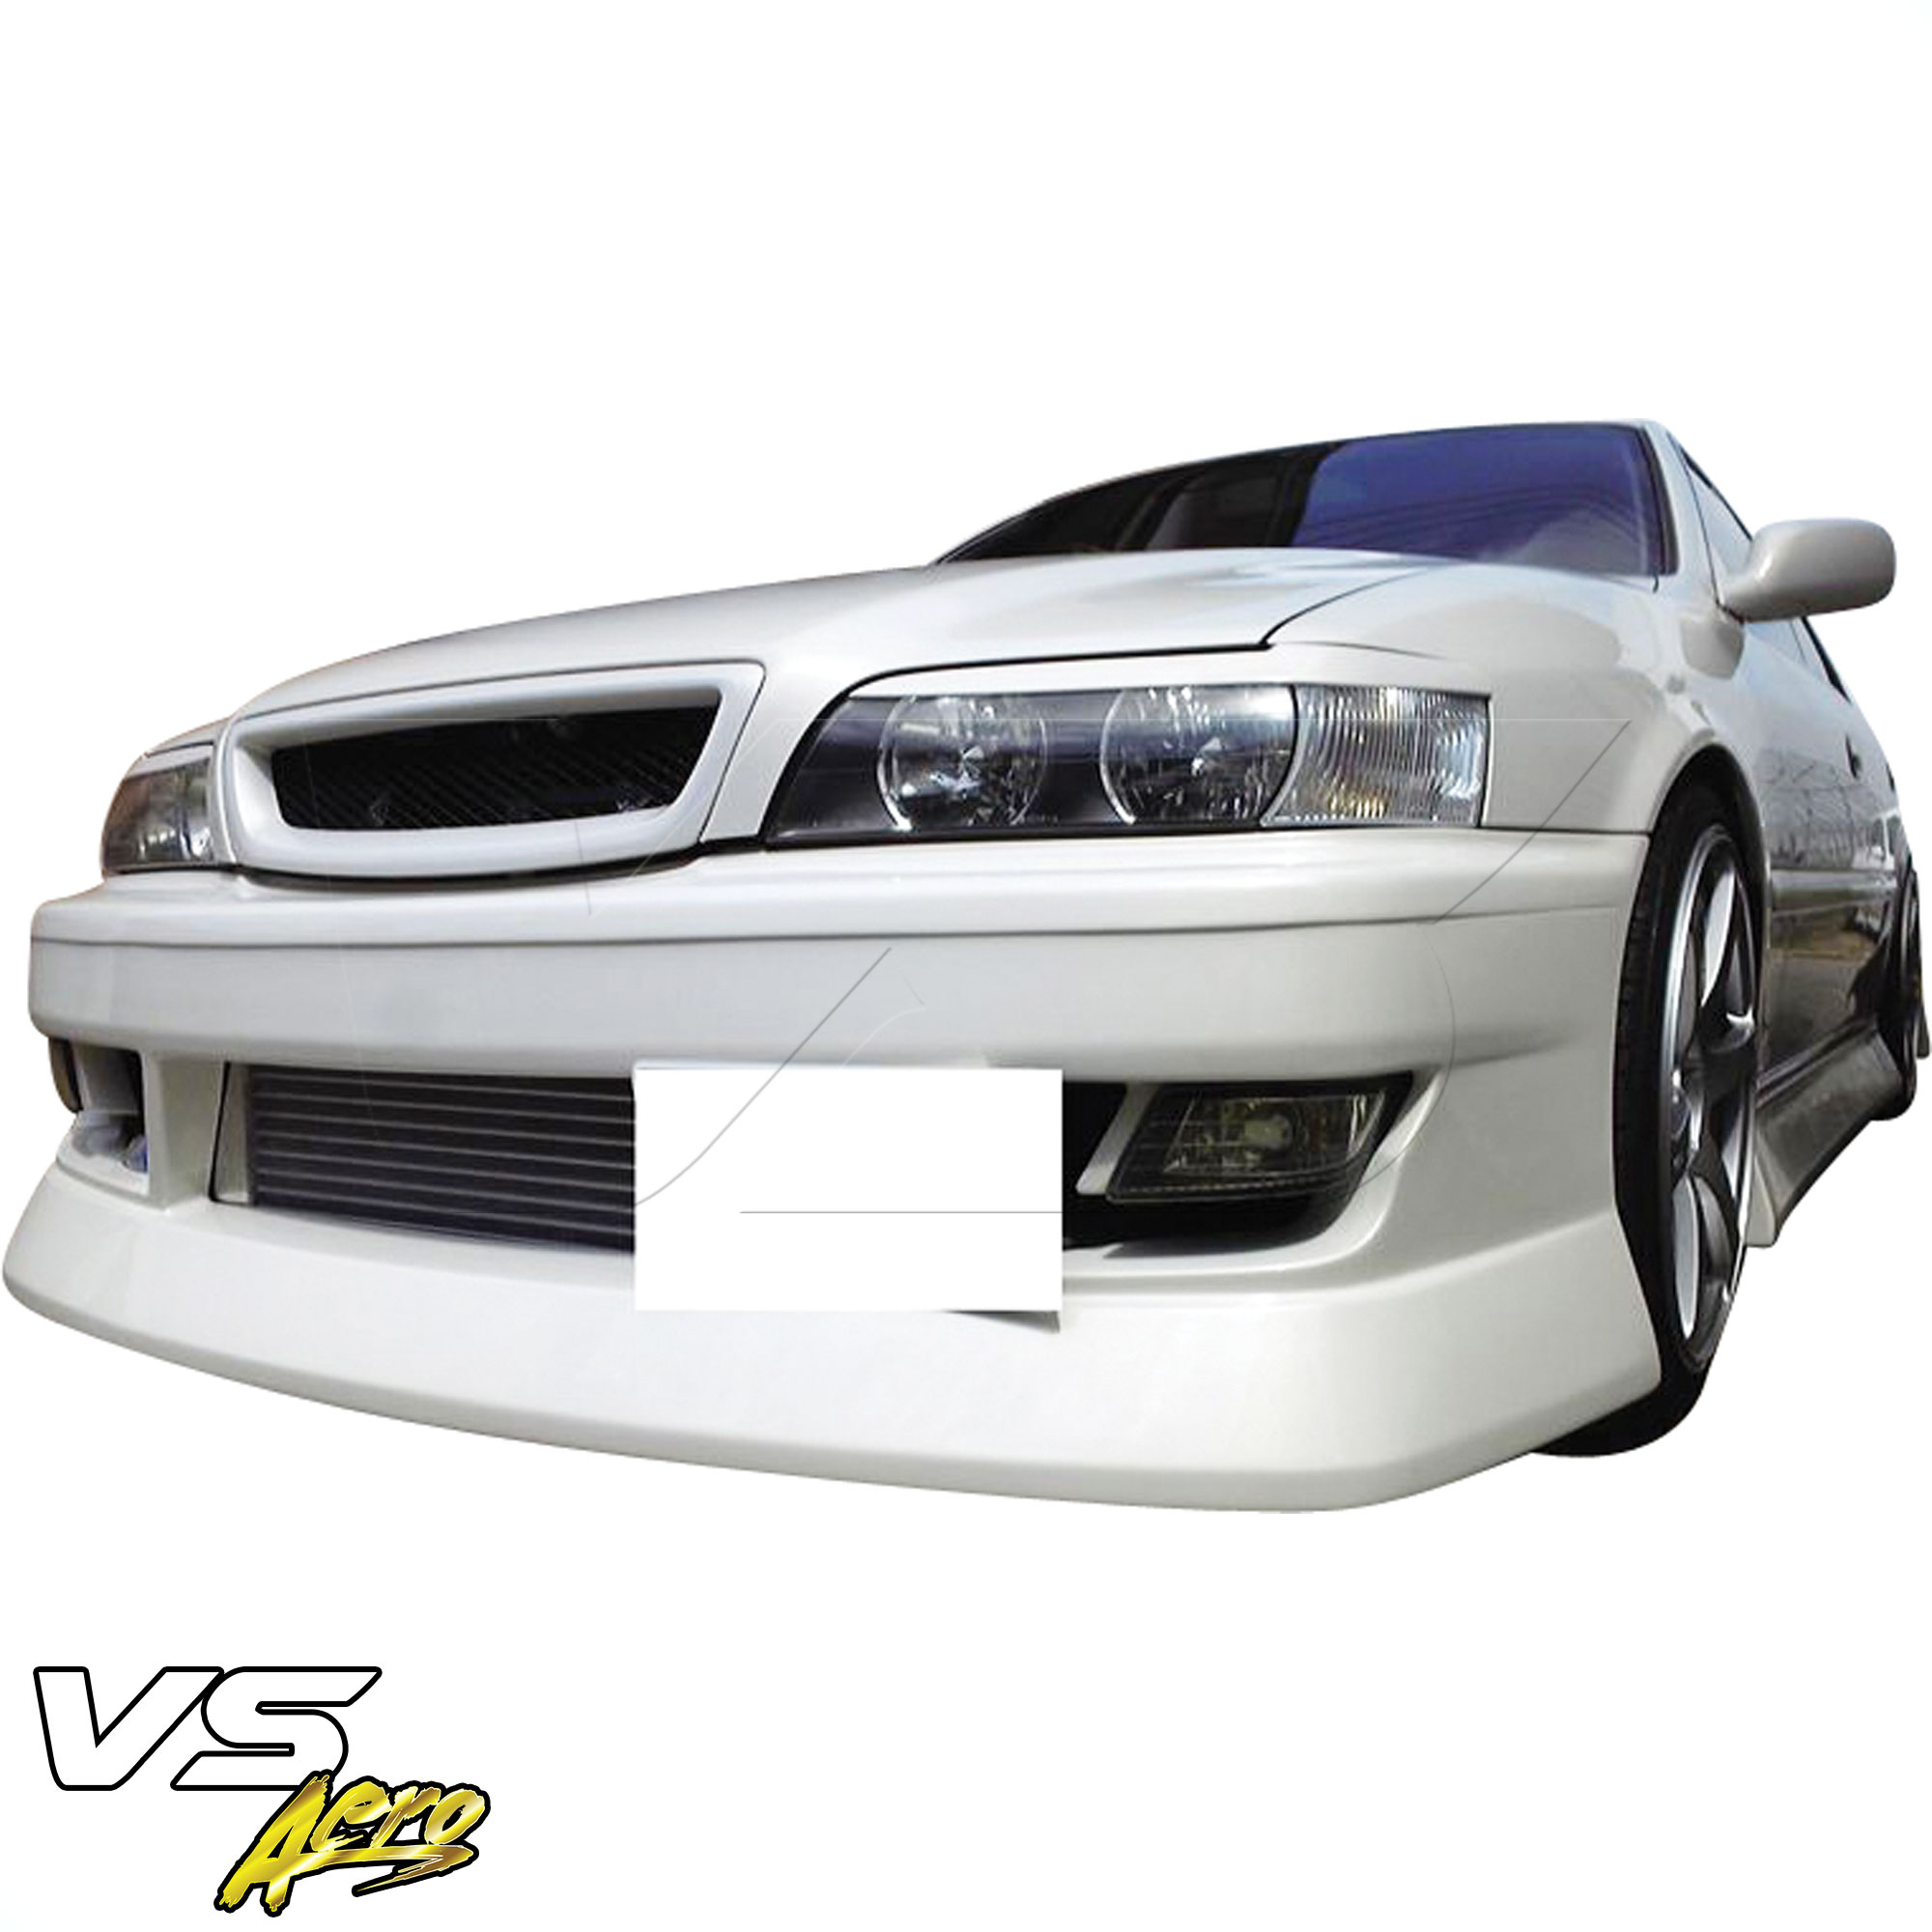 VSaero FRP BSPO Front Bumper > Toyota Chaser JZX100 1996-2000 - Image 4